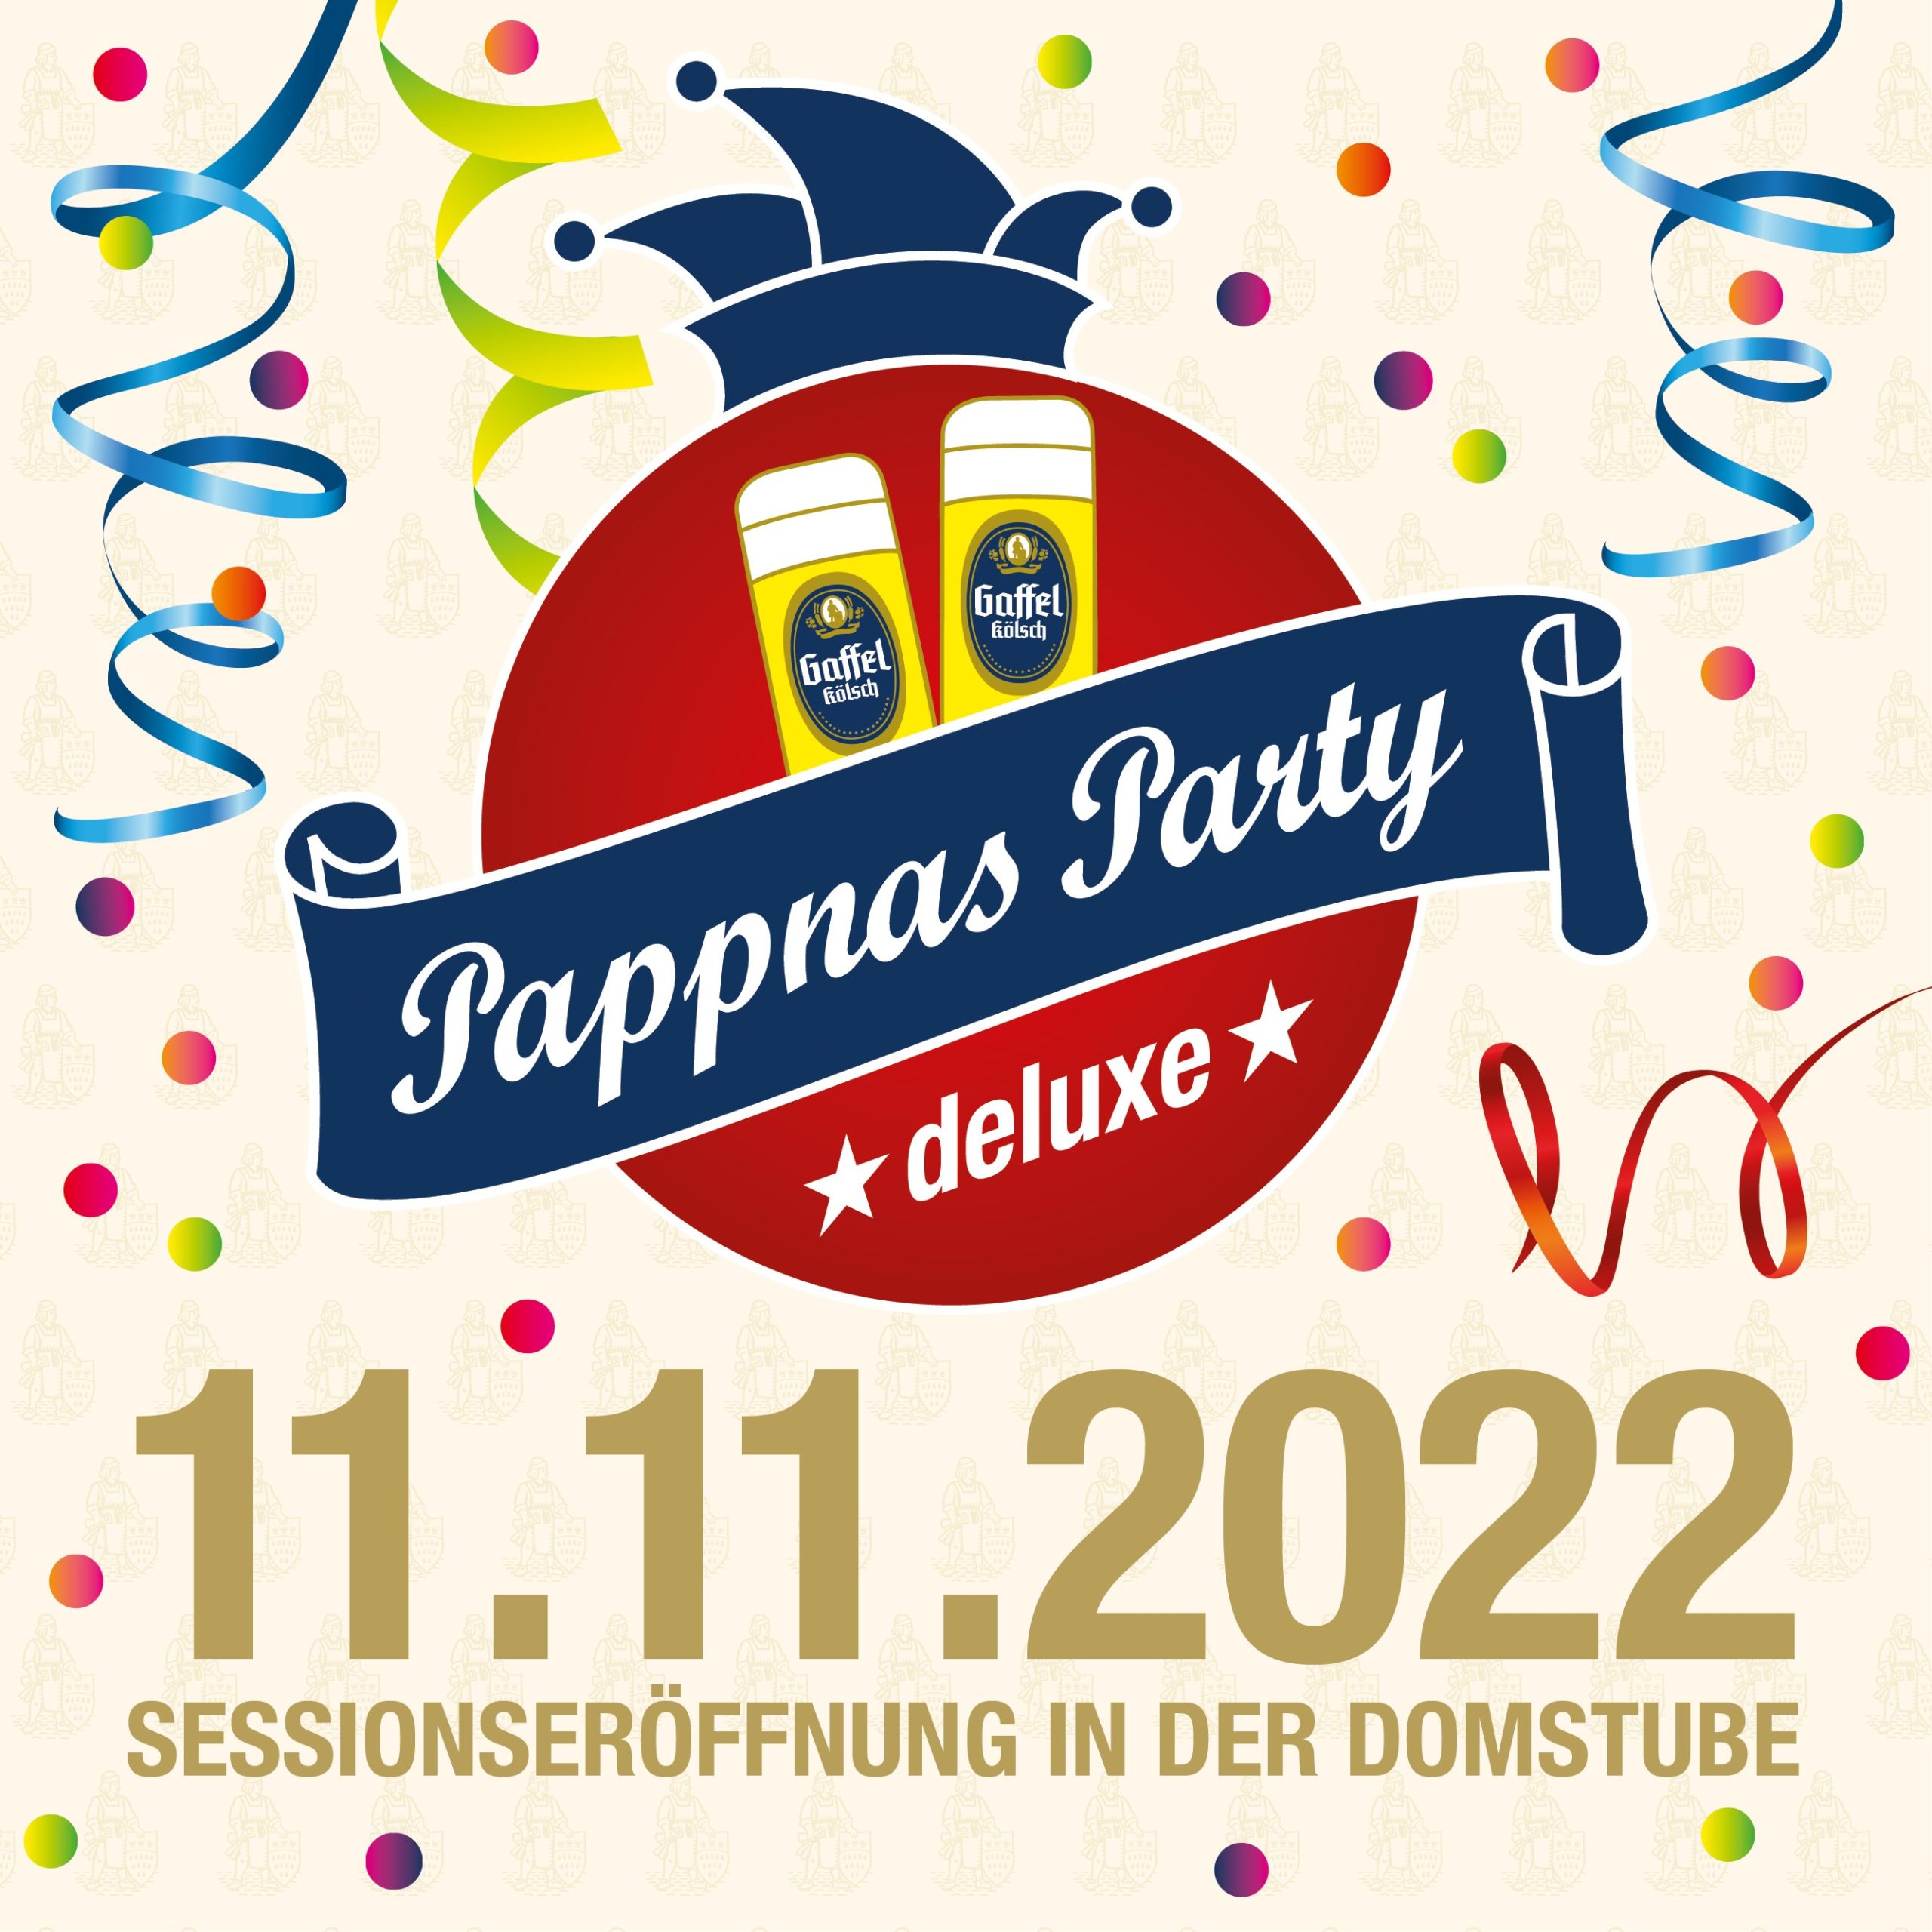 Pappnasparty Deluxe Gaffel am Dom Domstube VIP Komfort